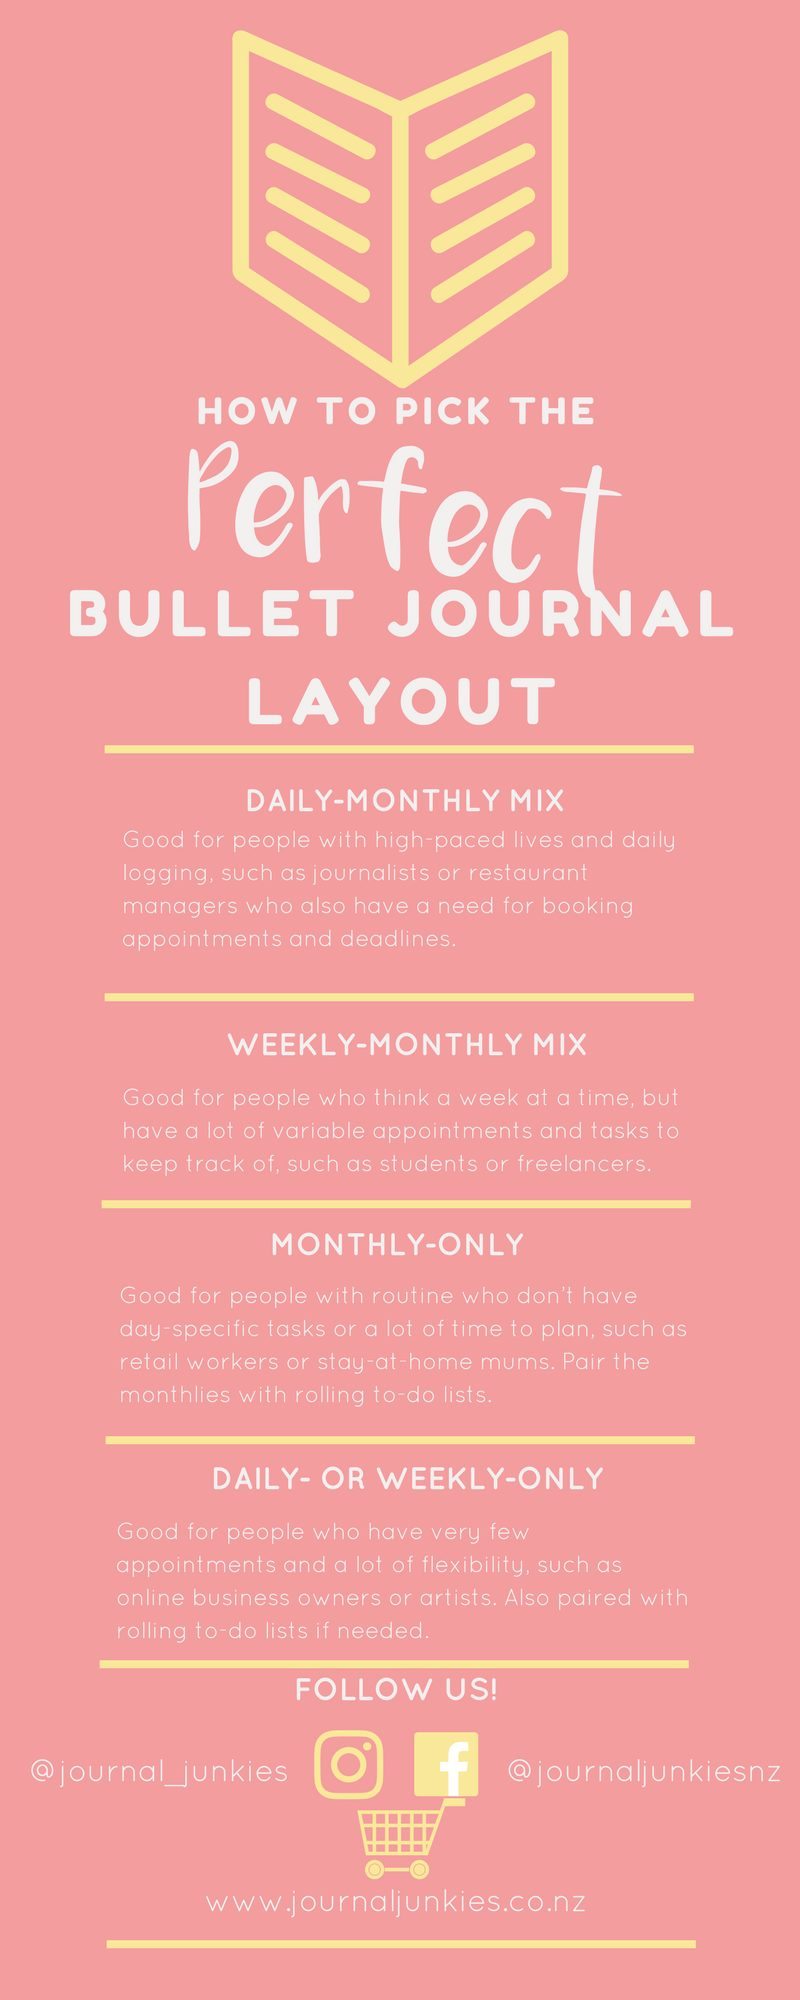 how to pick the perfect Bullet Journal layout